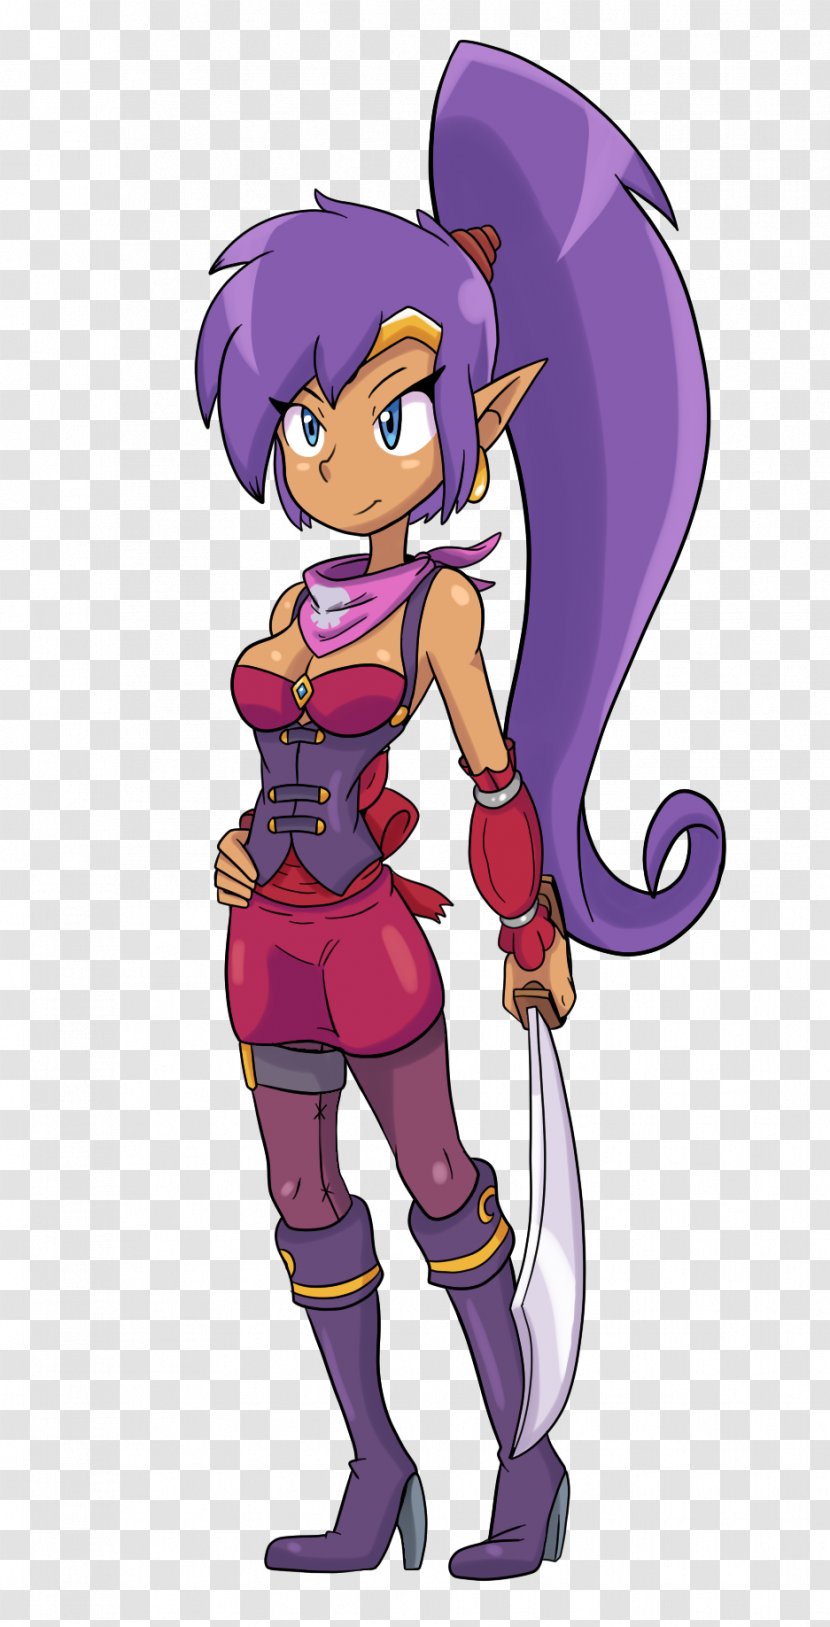 Shantae And The Pirate's Curse Fan Art Video Game DeviantArt Xbox One - Watercolor - Frame Transparent PNG